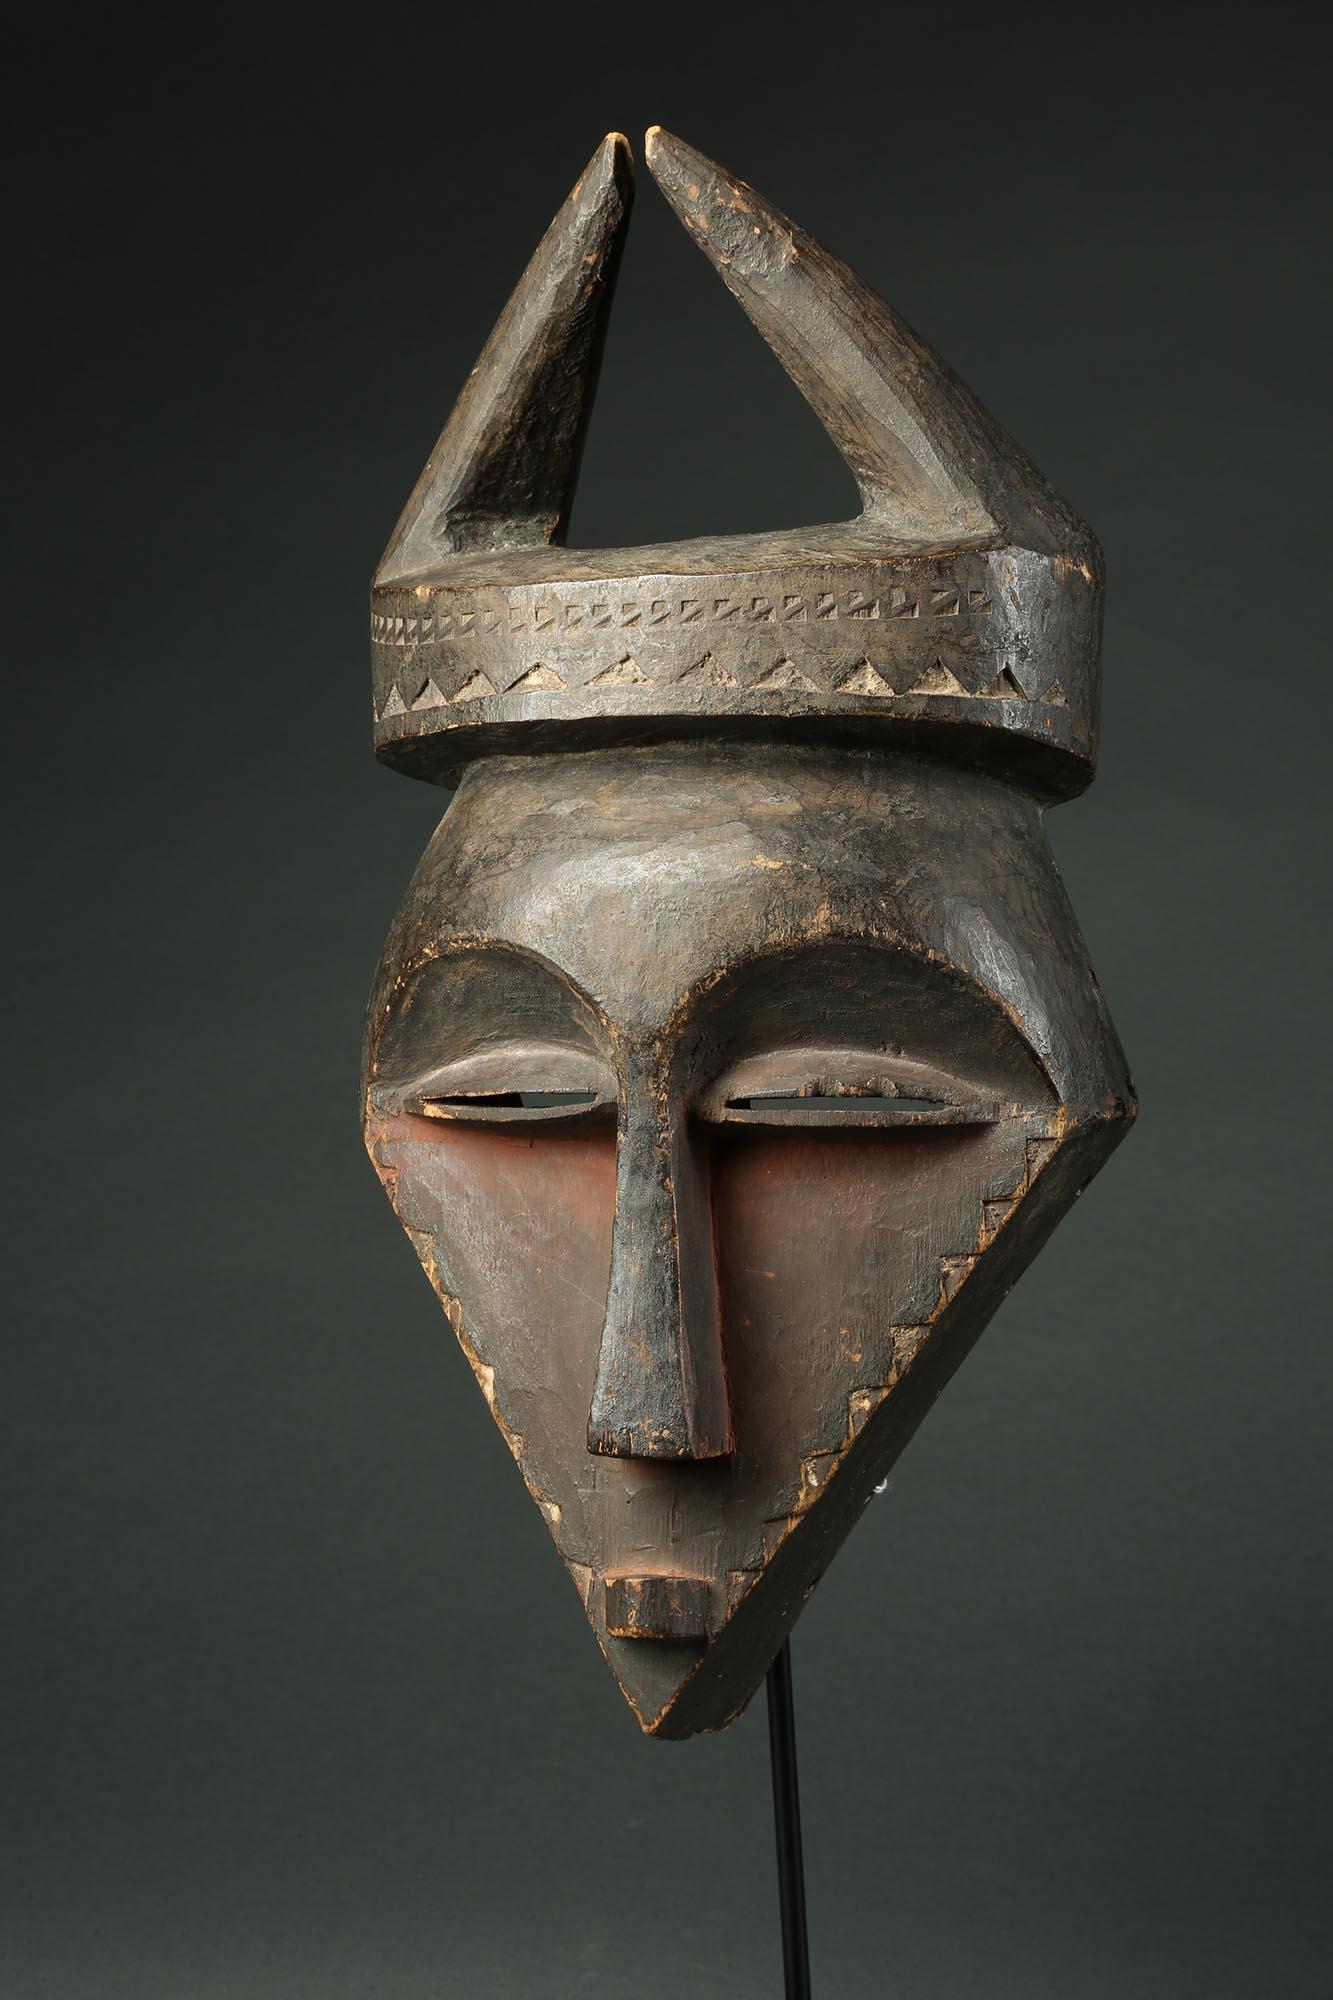 Wood Eastern Pende Geometric Tribal Mask with Horns Ex Museum Congo, Africa